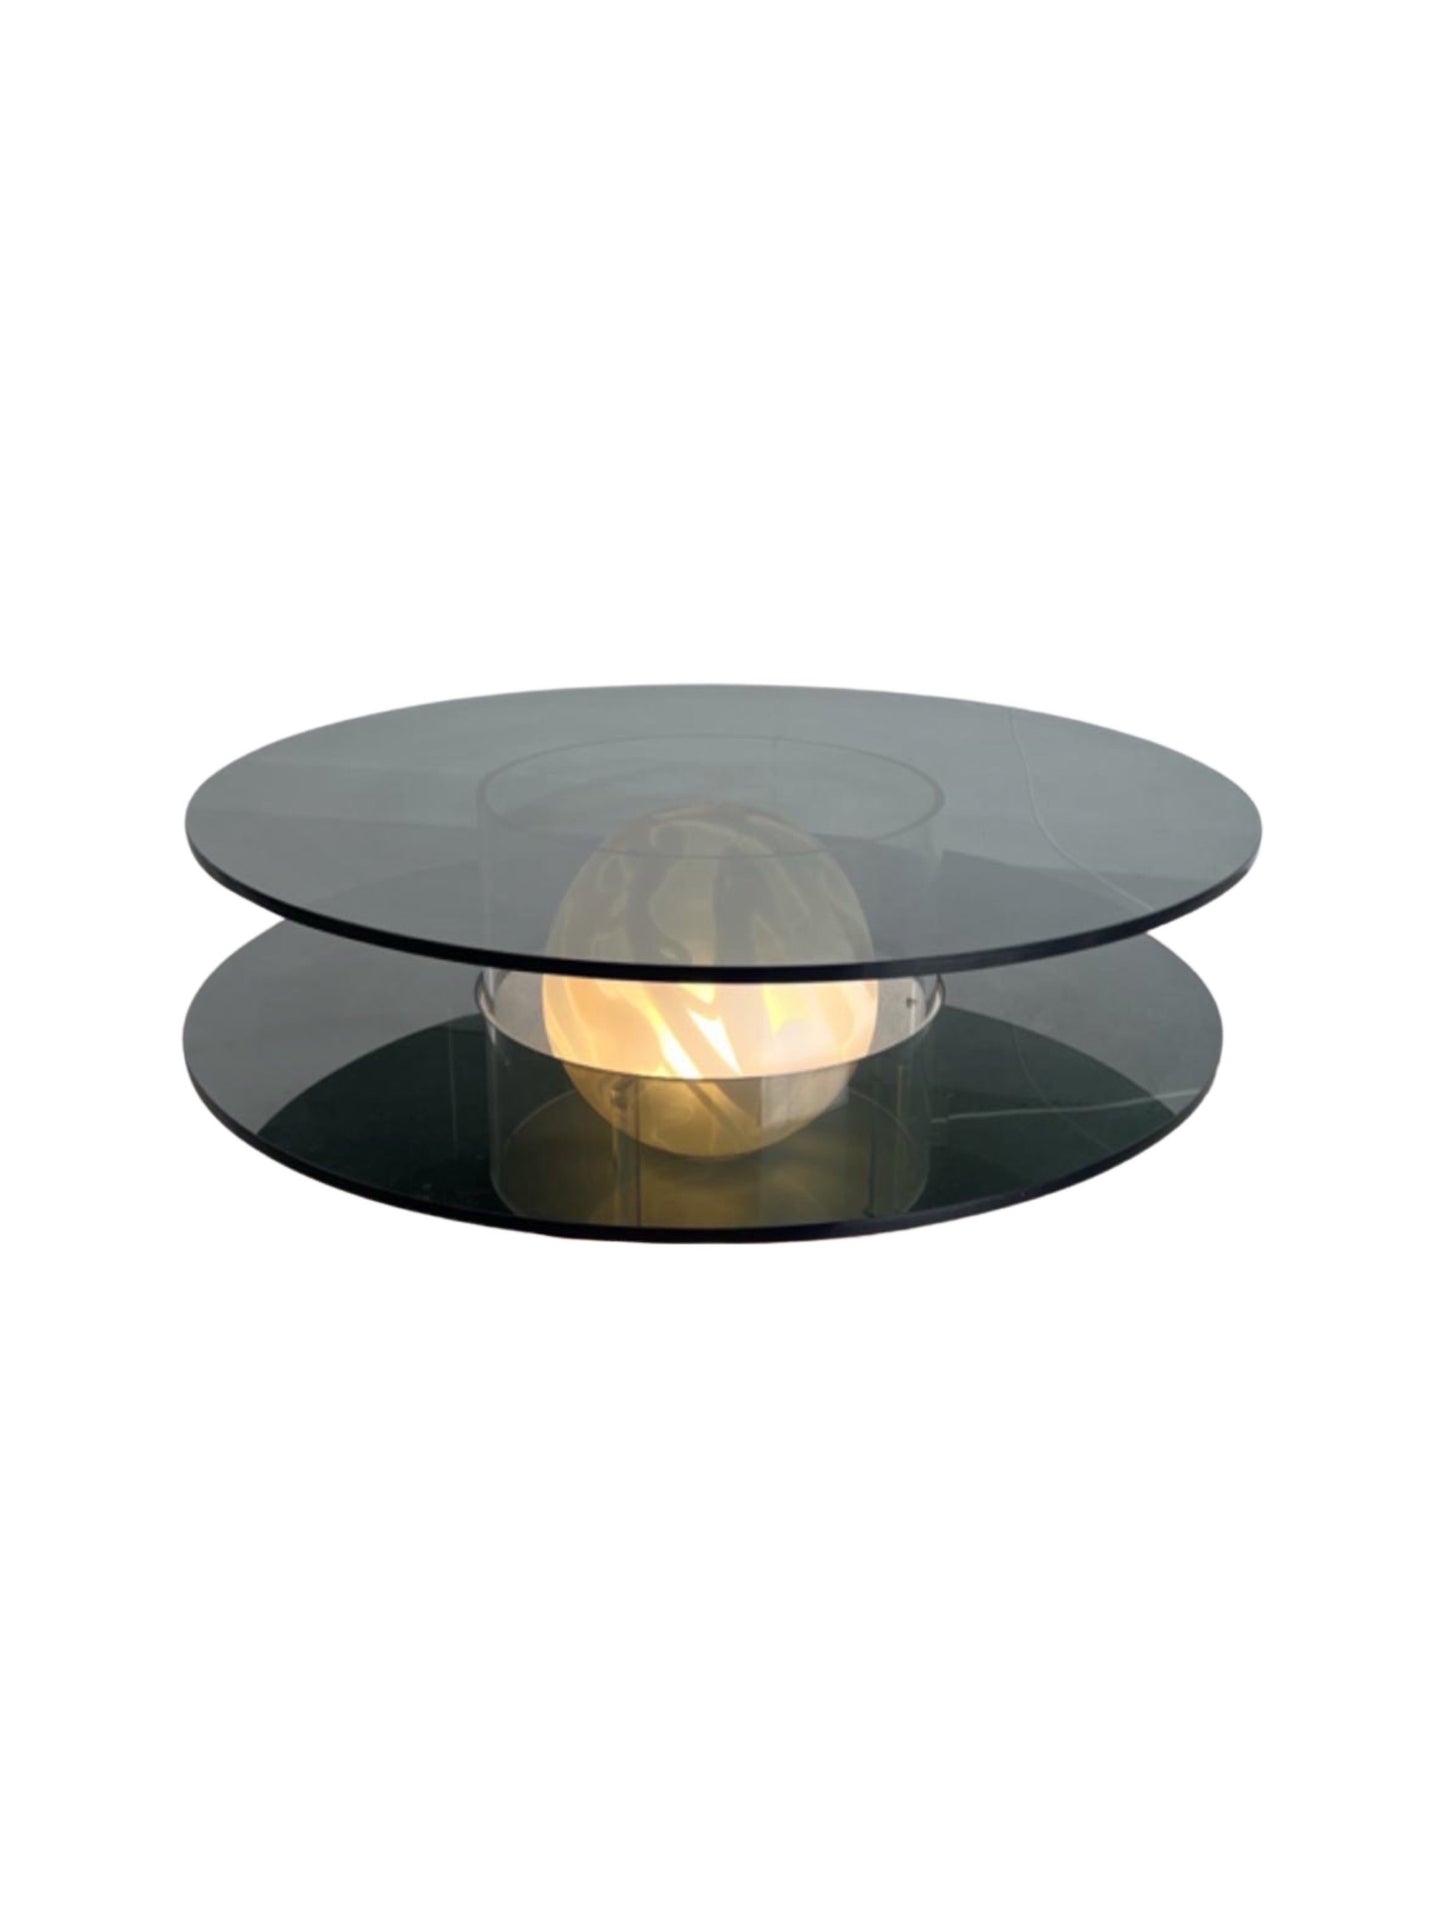 Space Age Round Coffee Table with Smoked Glass, Plexiglass base & inside Murano Glass Ball, 1970s